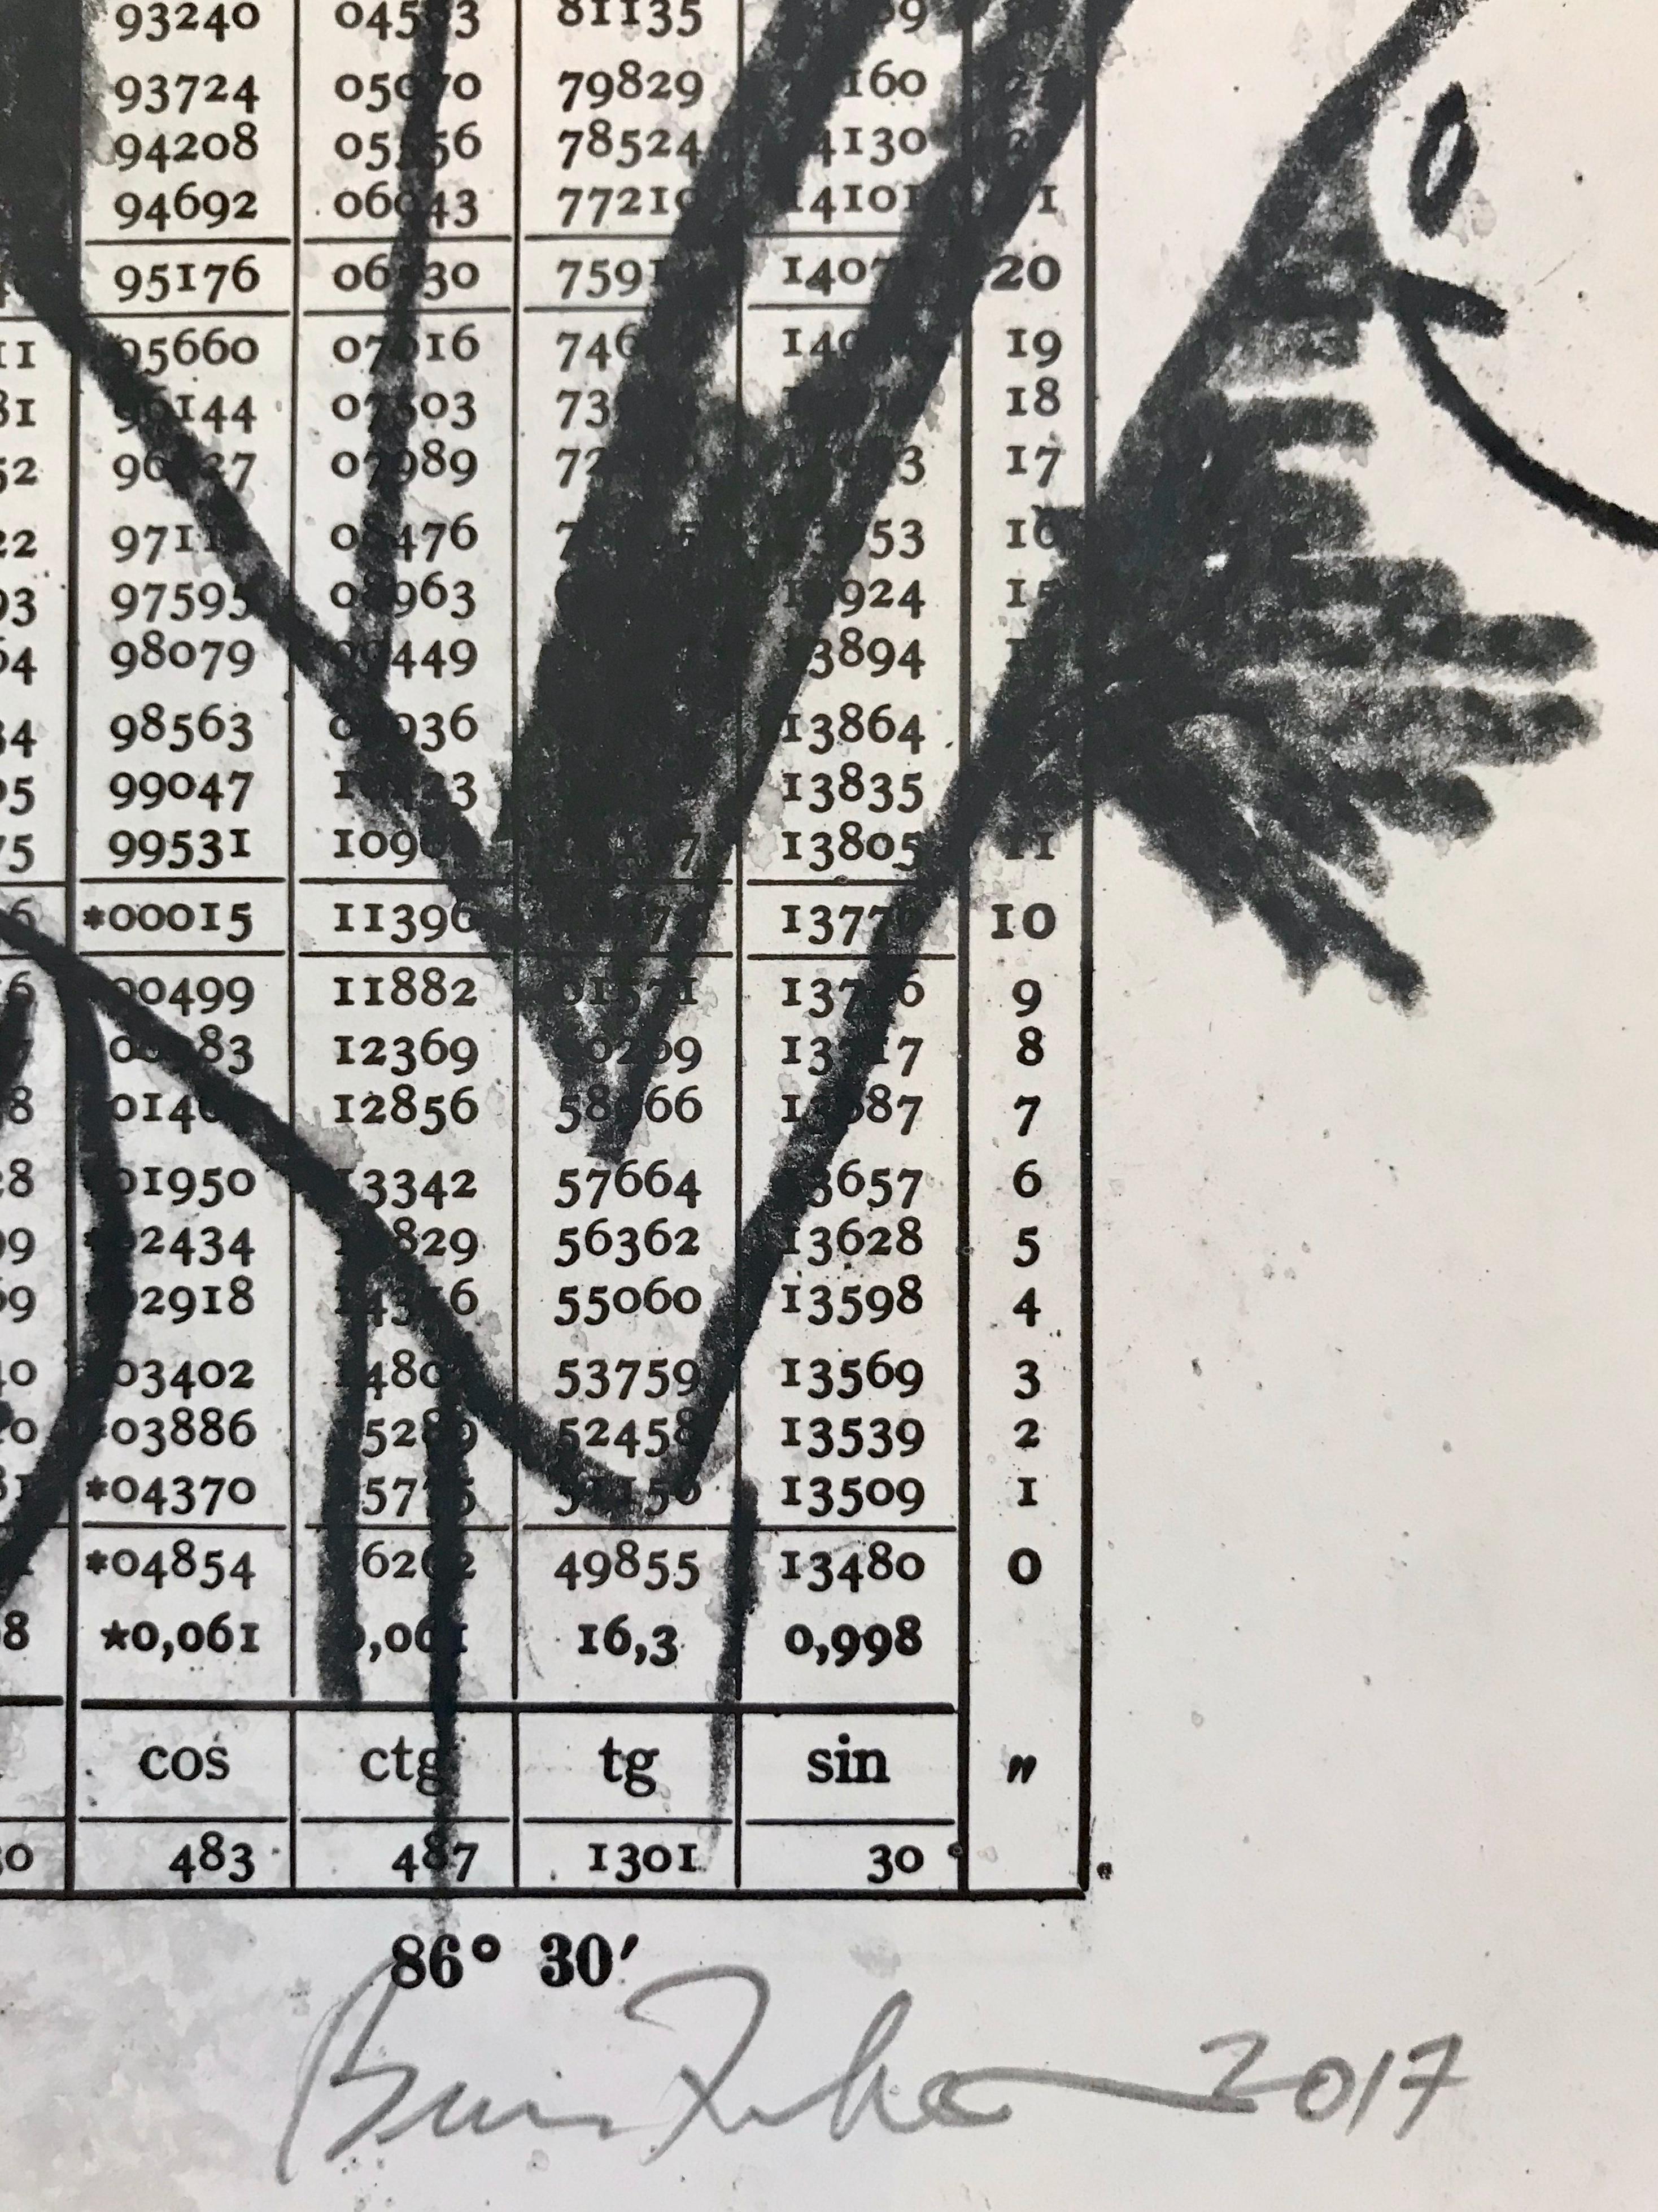 Brian Fekete’s “No. 71” is a small, unframed 10 x 8 inch monochromatic watercolor pencil on vintage paper drawing. Using the pages of a 1943 trigonometry resource printed with columns of numerical results as a support, the artist has drawn a